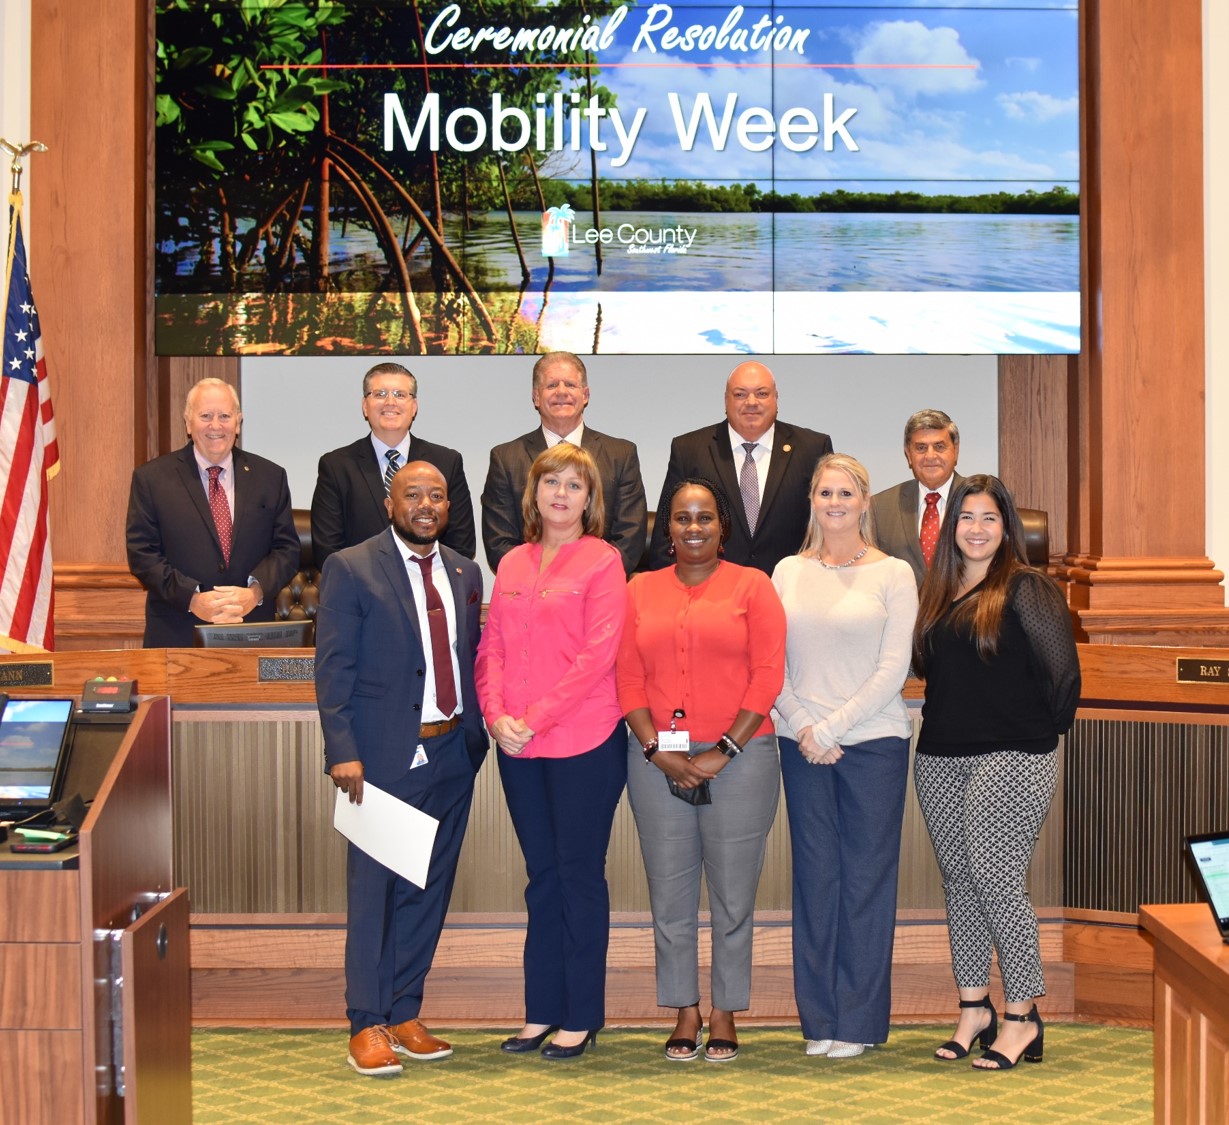 10-19-21 Mobility Week